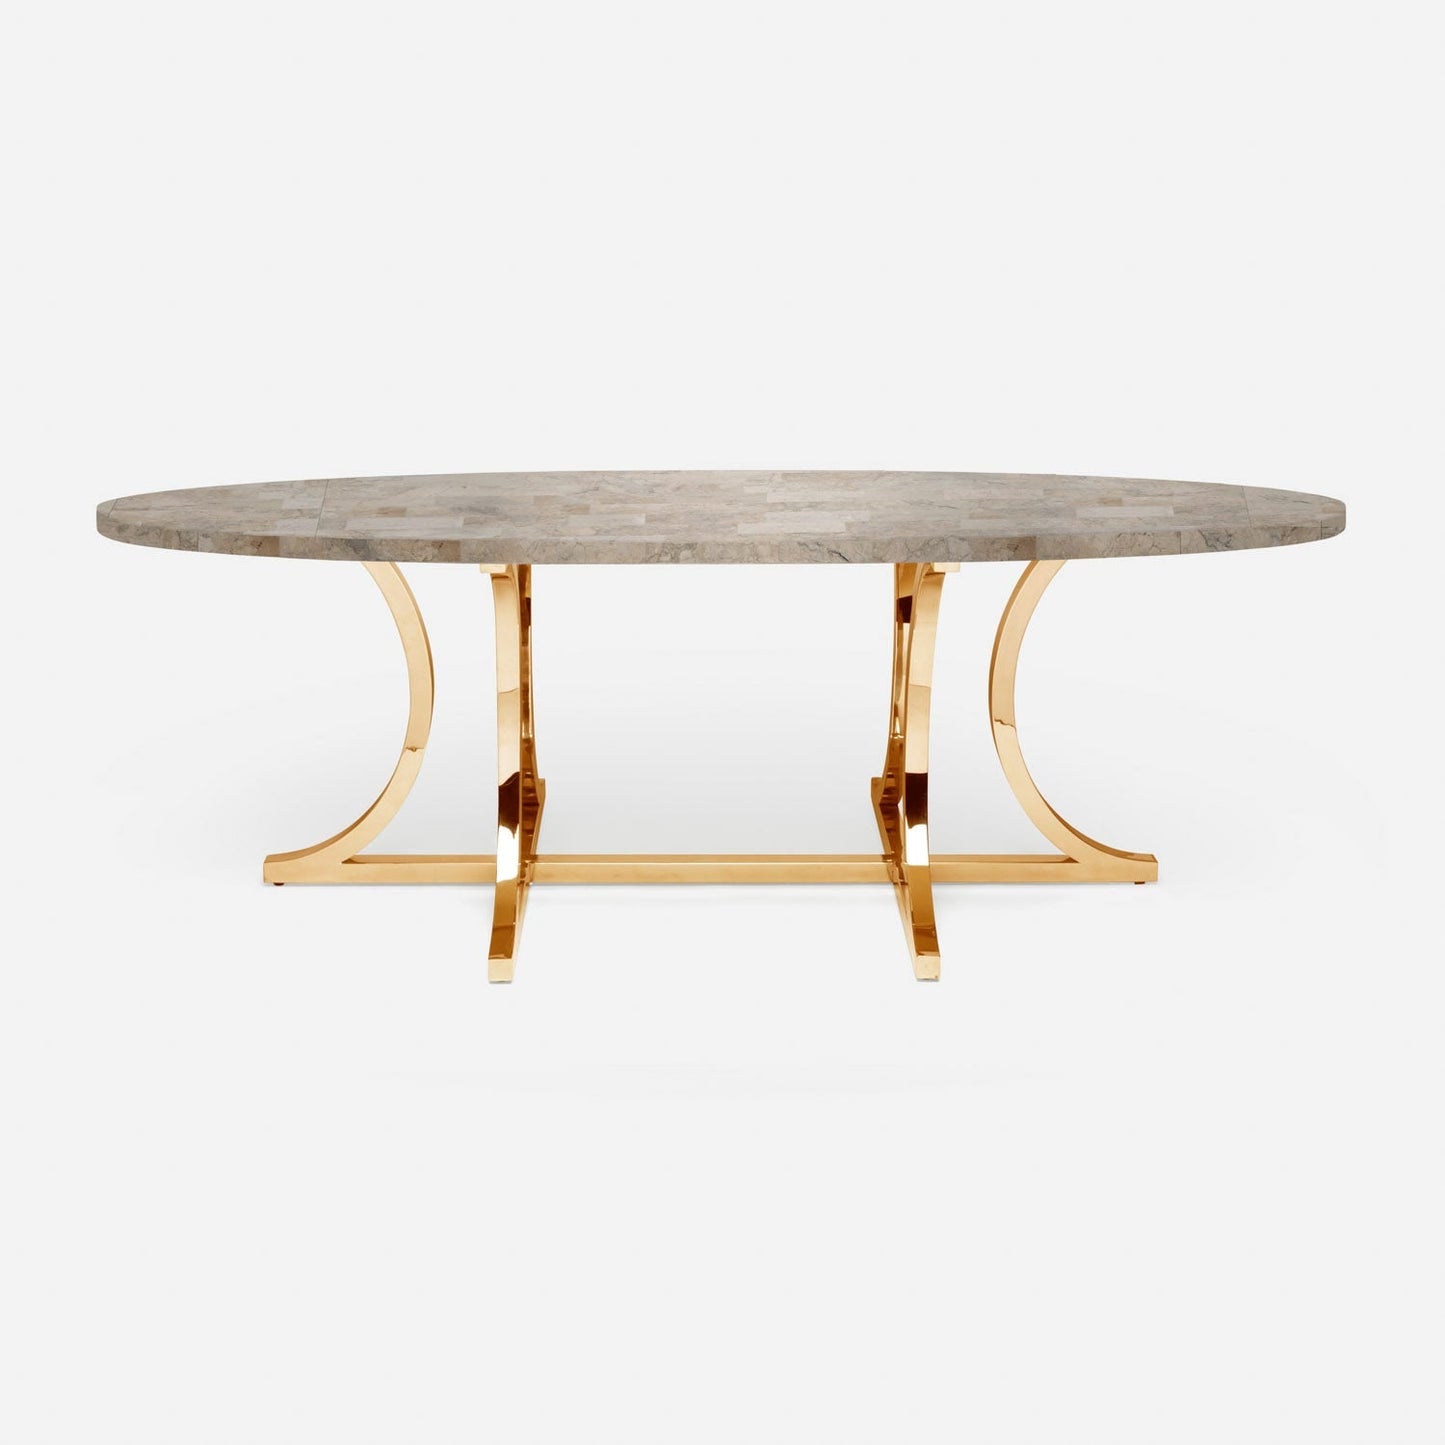 Made Goods Leighton 96" x 44" x 30" Polished Gold Steel Dinning Table With Oval Warm Gray Marble Table Top